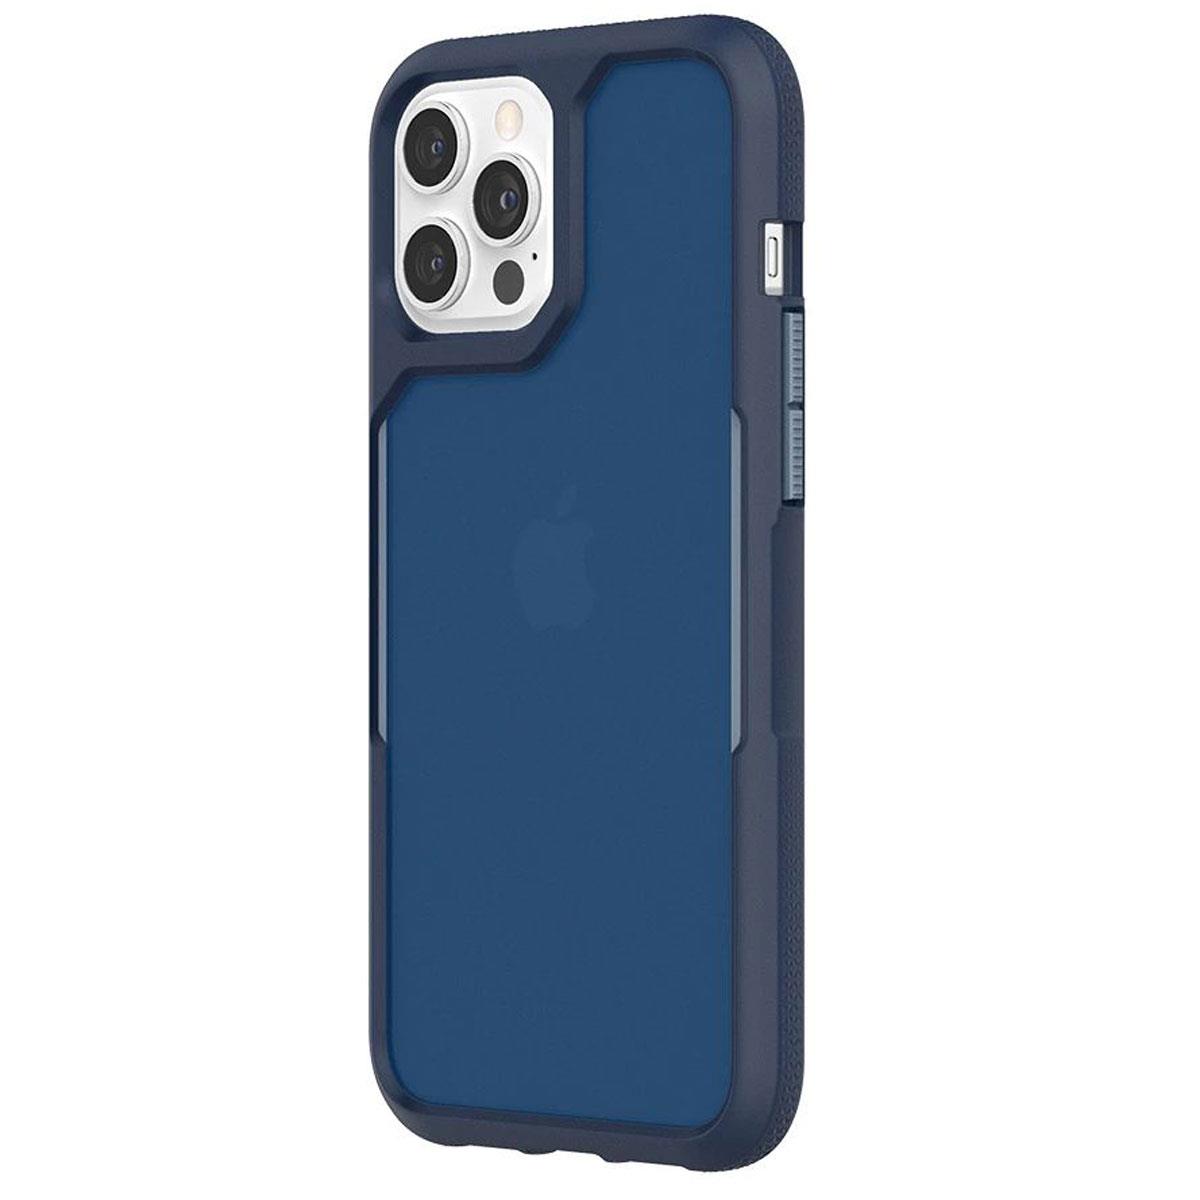 Image of Griffin Technology Survivor Endurance Case for iPhone 12Pro Max